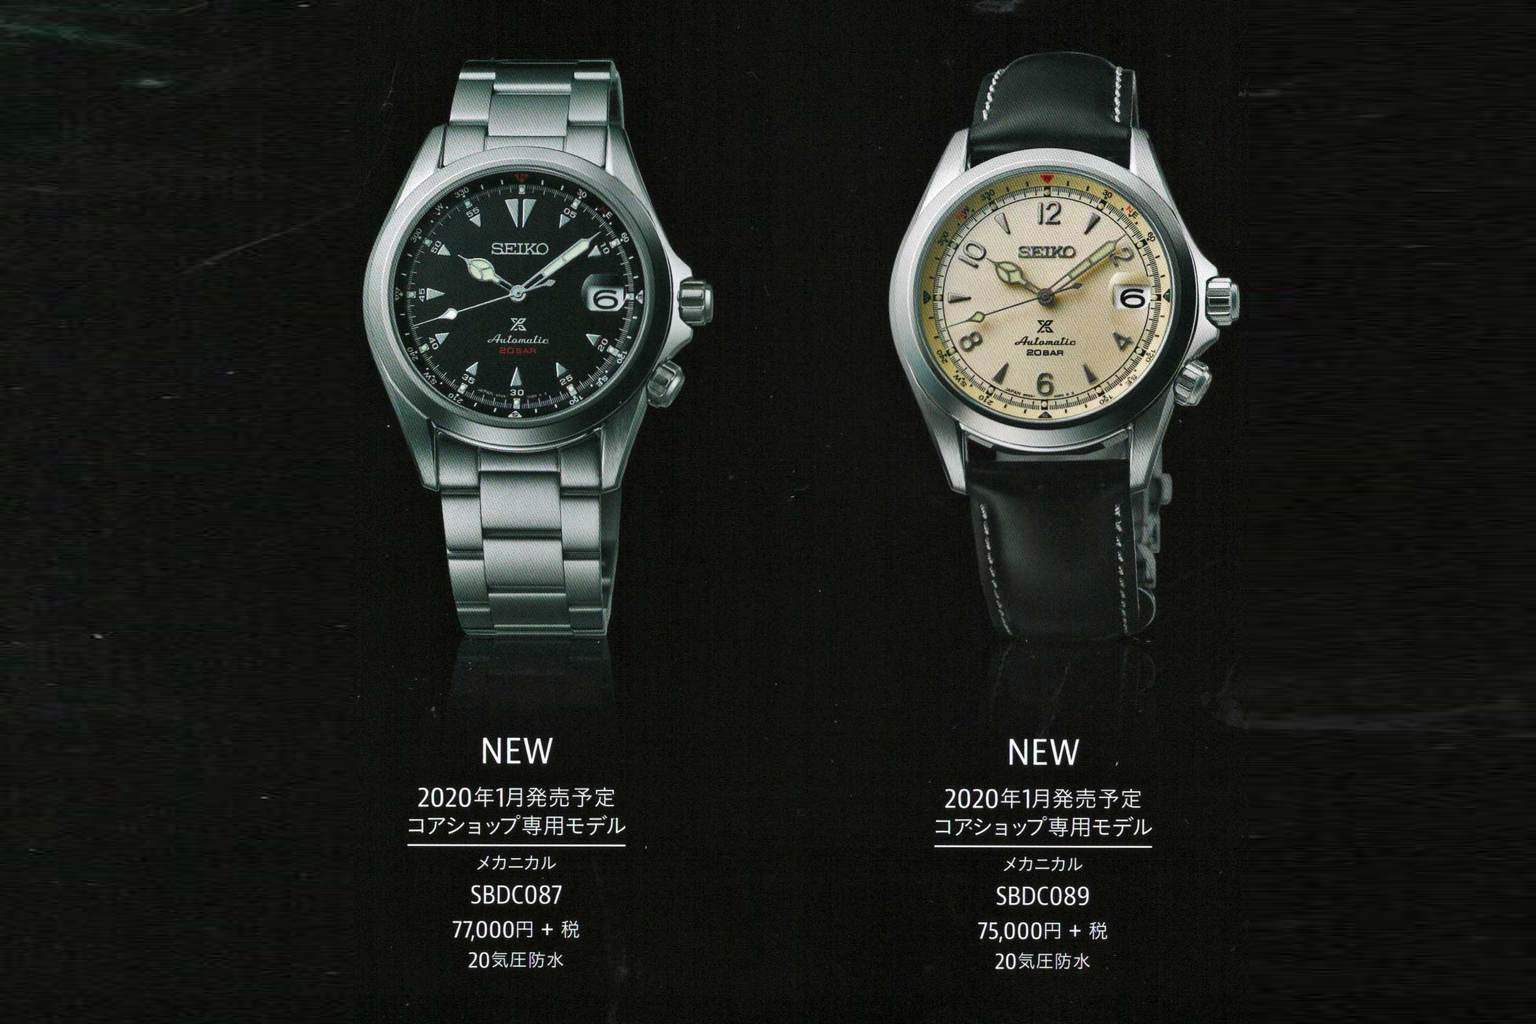 The Return of the Seiko Alpinist (in Green) Appears Imminent - Worn \u0026 Wound